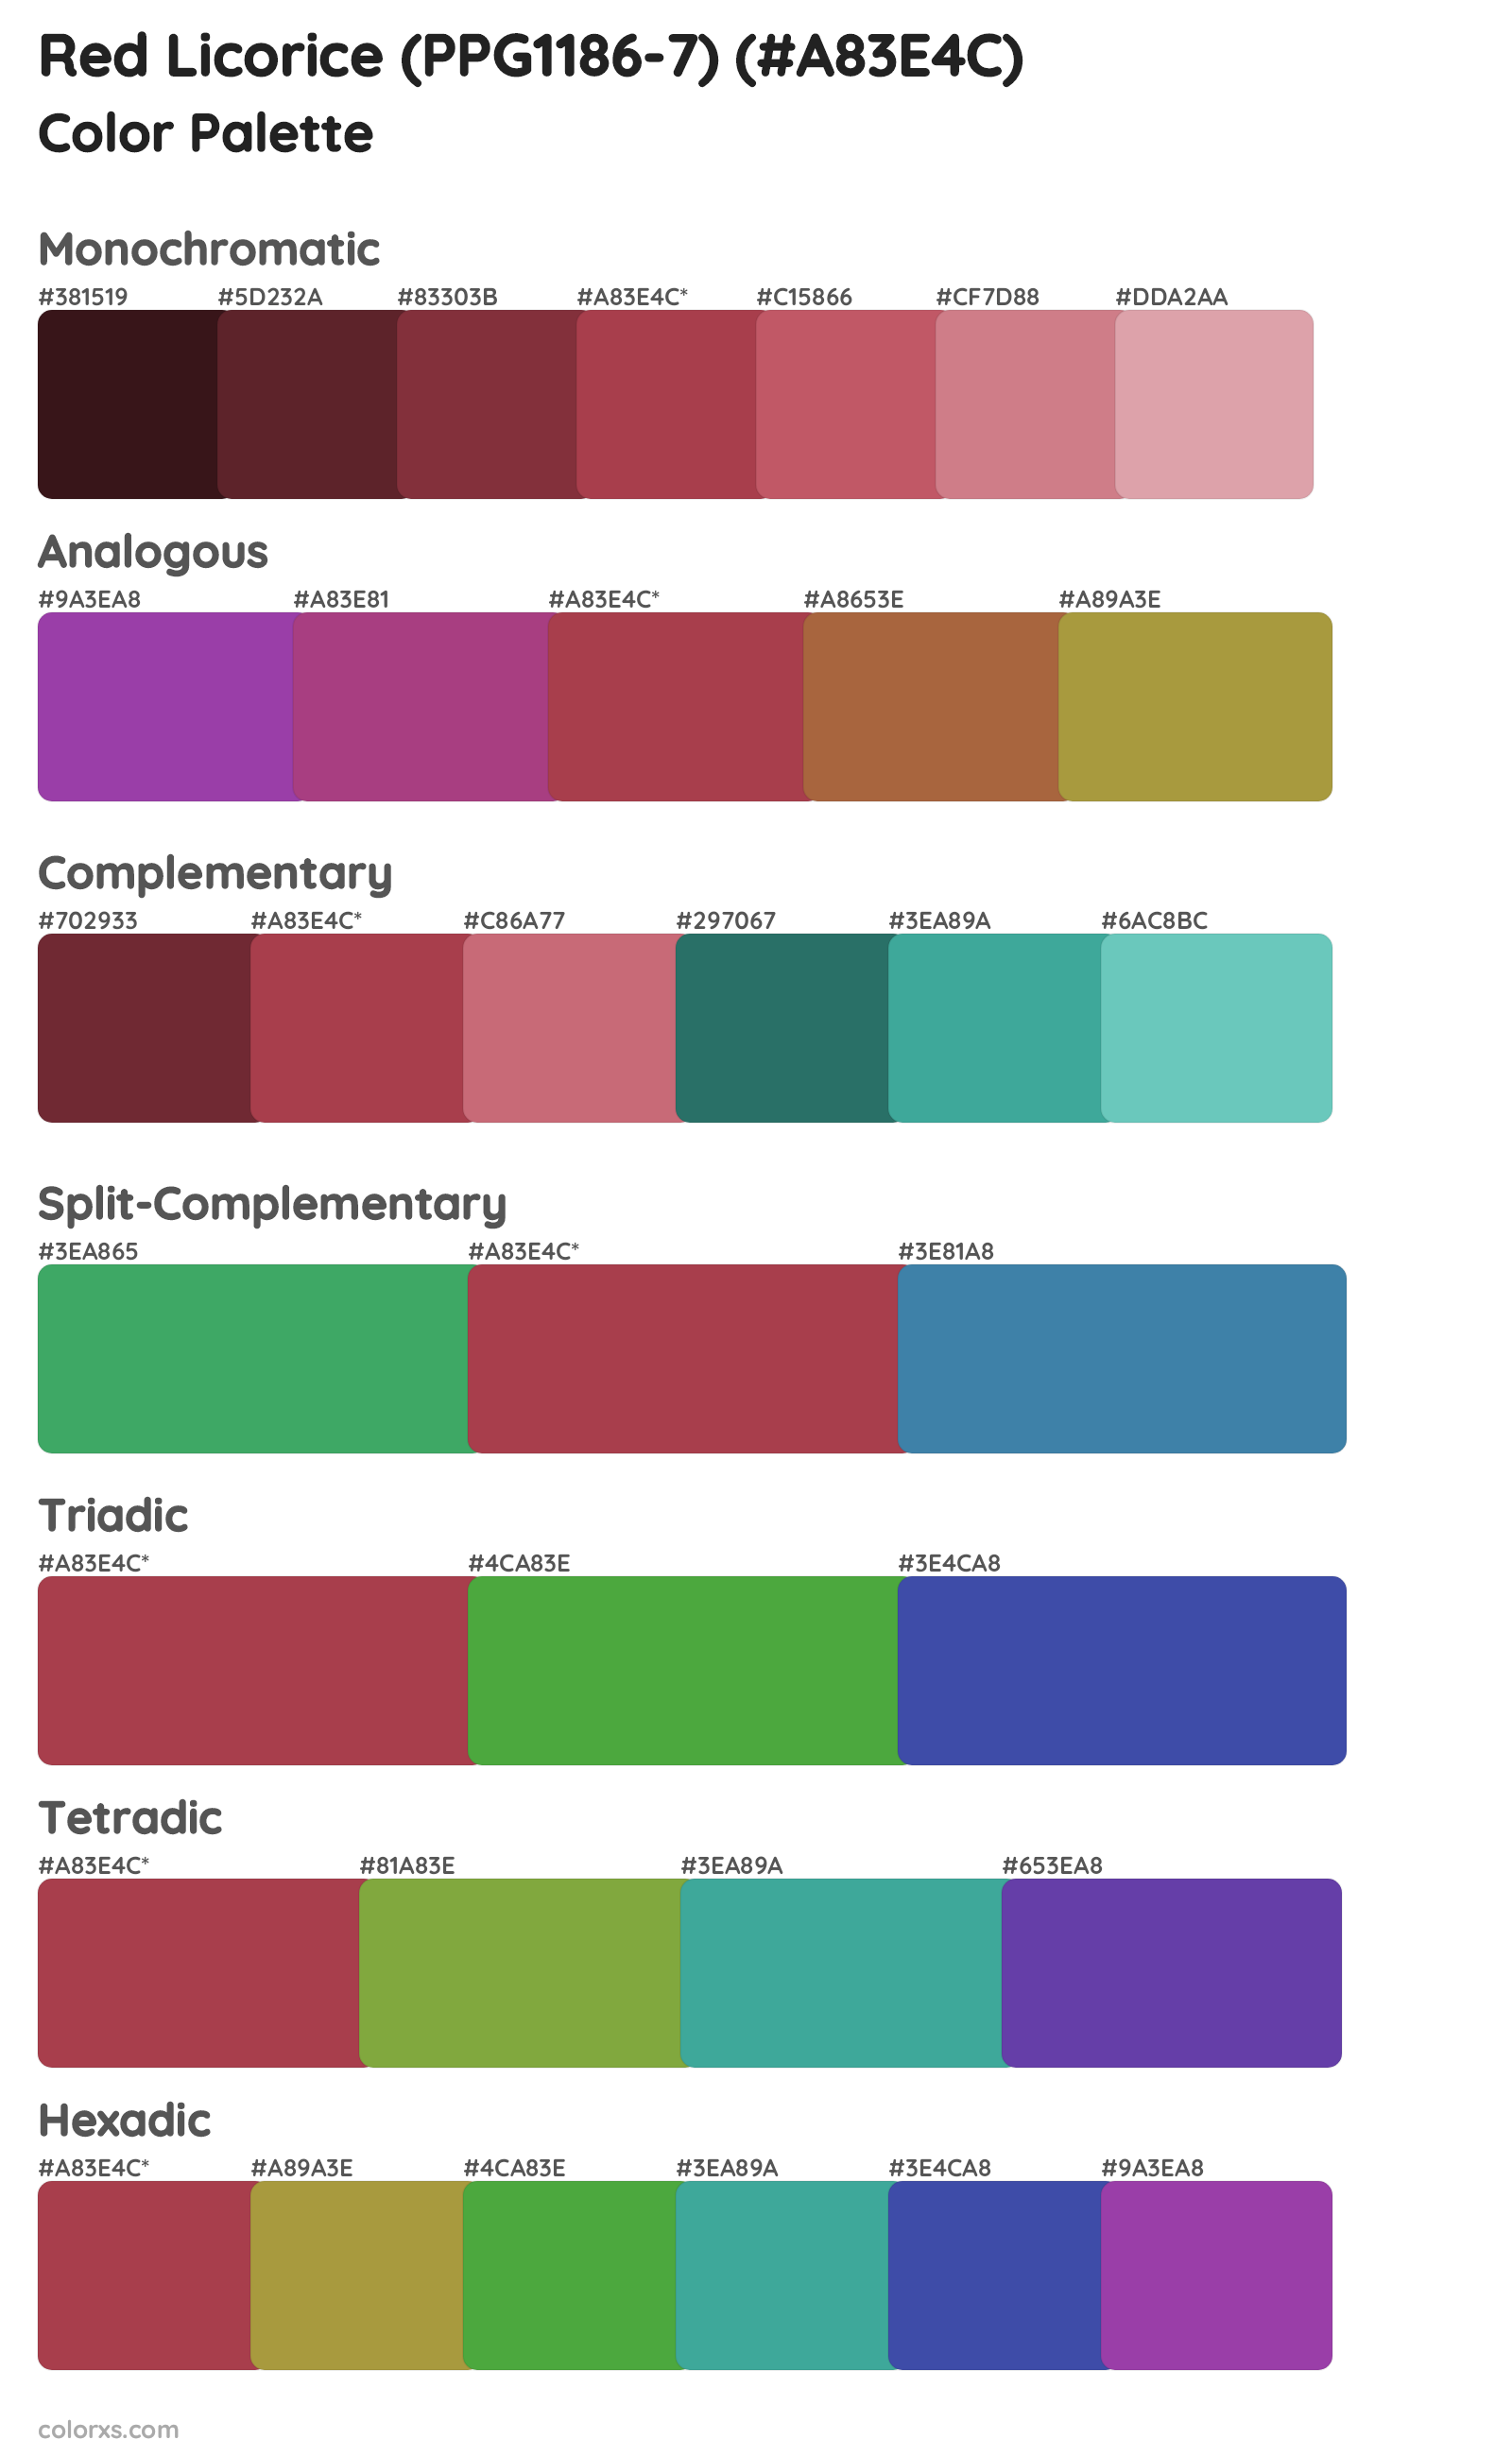 Red Licorice (PPG1186-7) Color Scheme Palettes